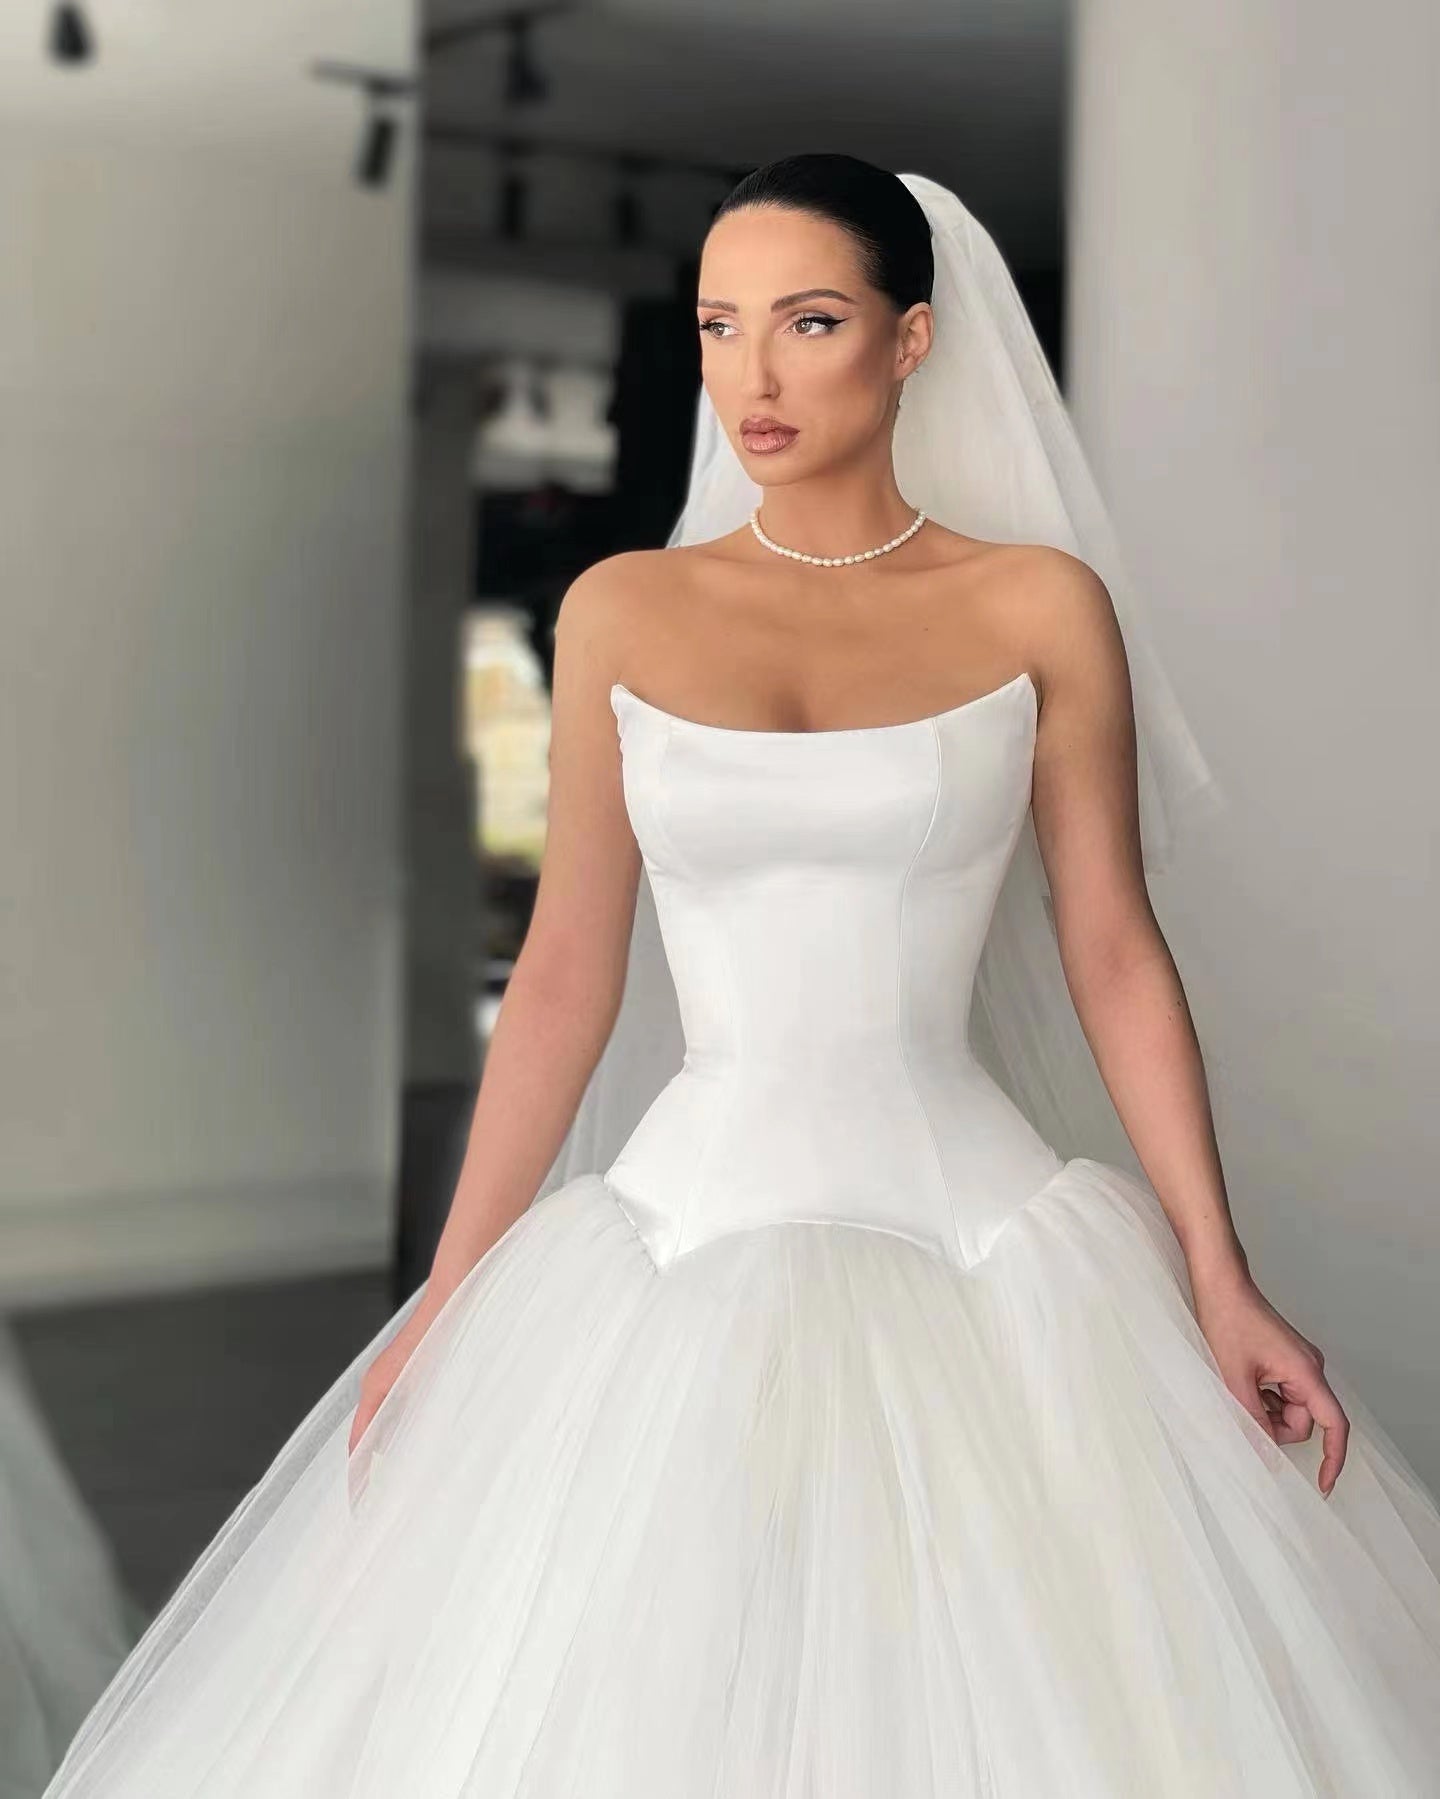 Strapless A-line Wedding Dresses, Simple Bridal Gowns, Newest Tulle Wedding Gowns